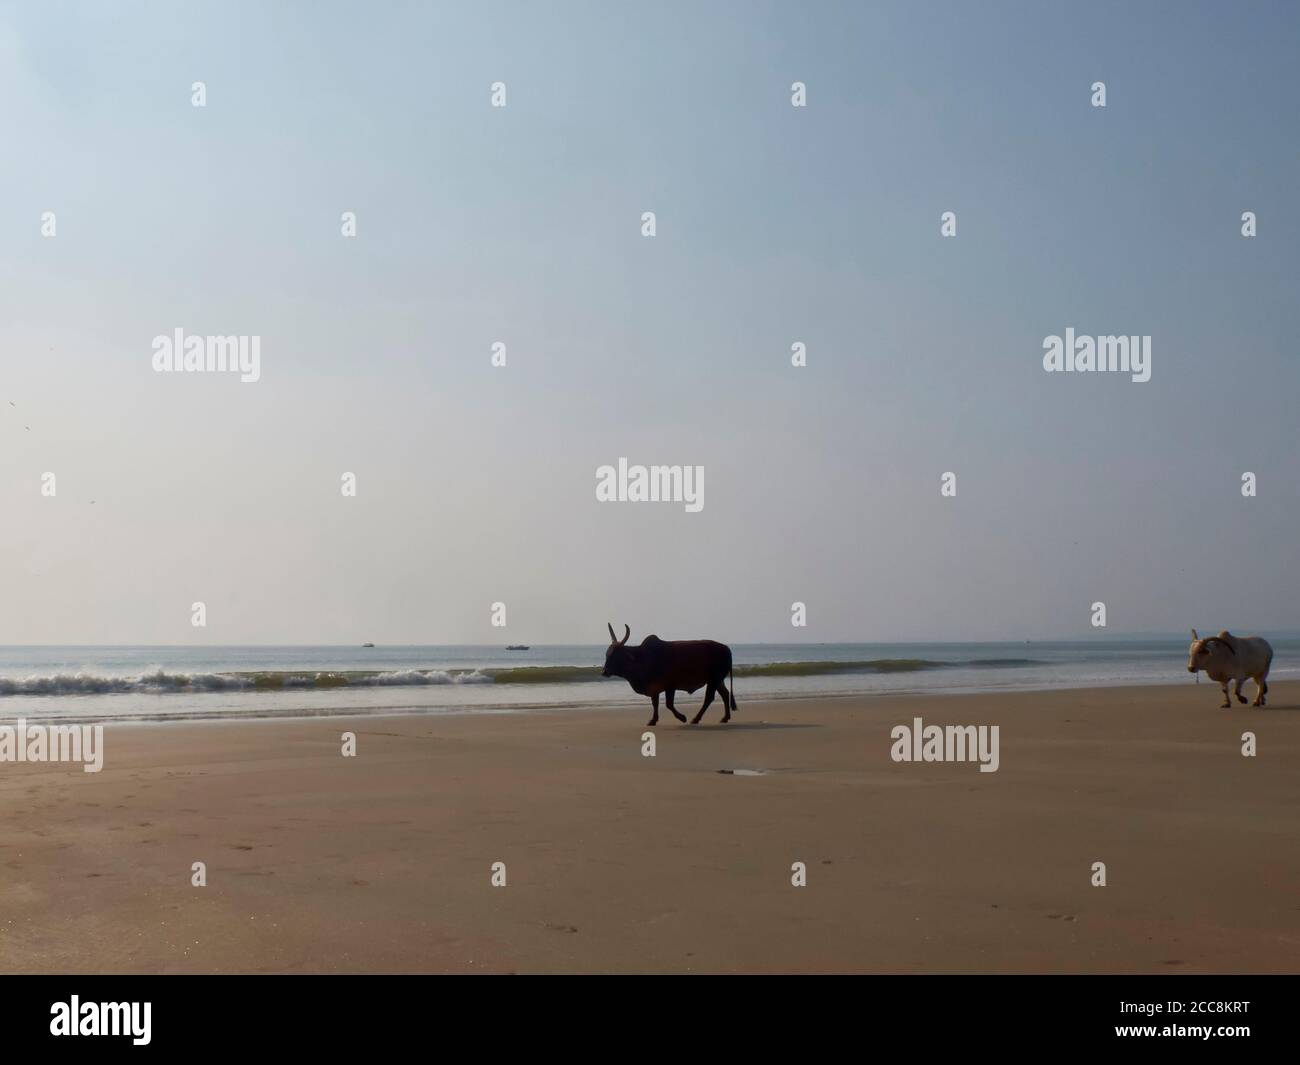 Two horned bulls walk down the sandy beach opposite the sea. Indian cow, holy cow, sacred animal. Stock Photo